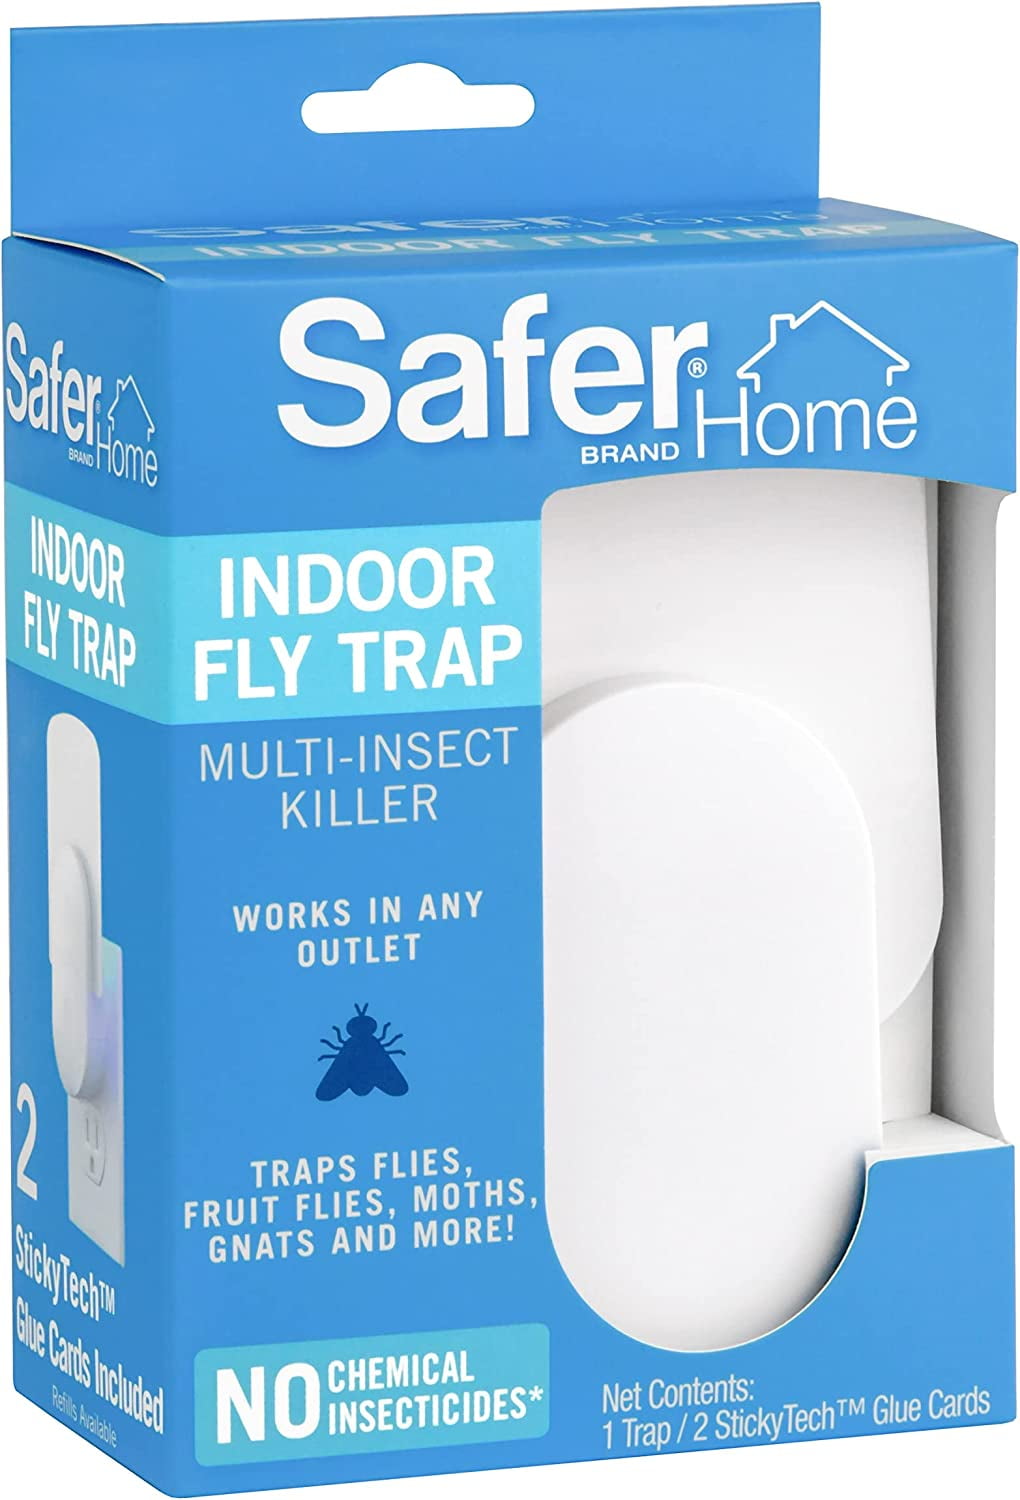 Indoor Fly Trap by Monterey (4pk)